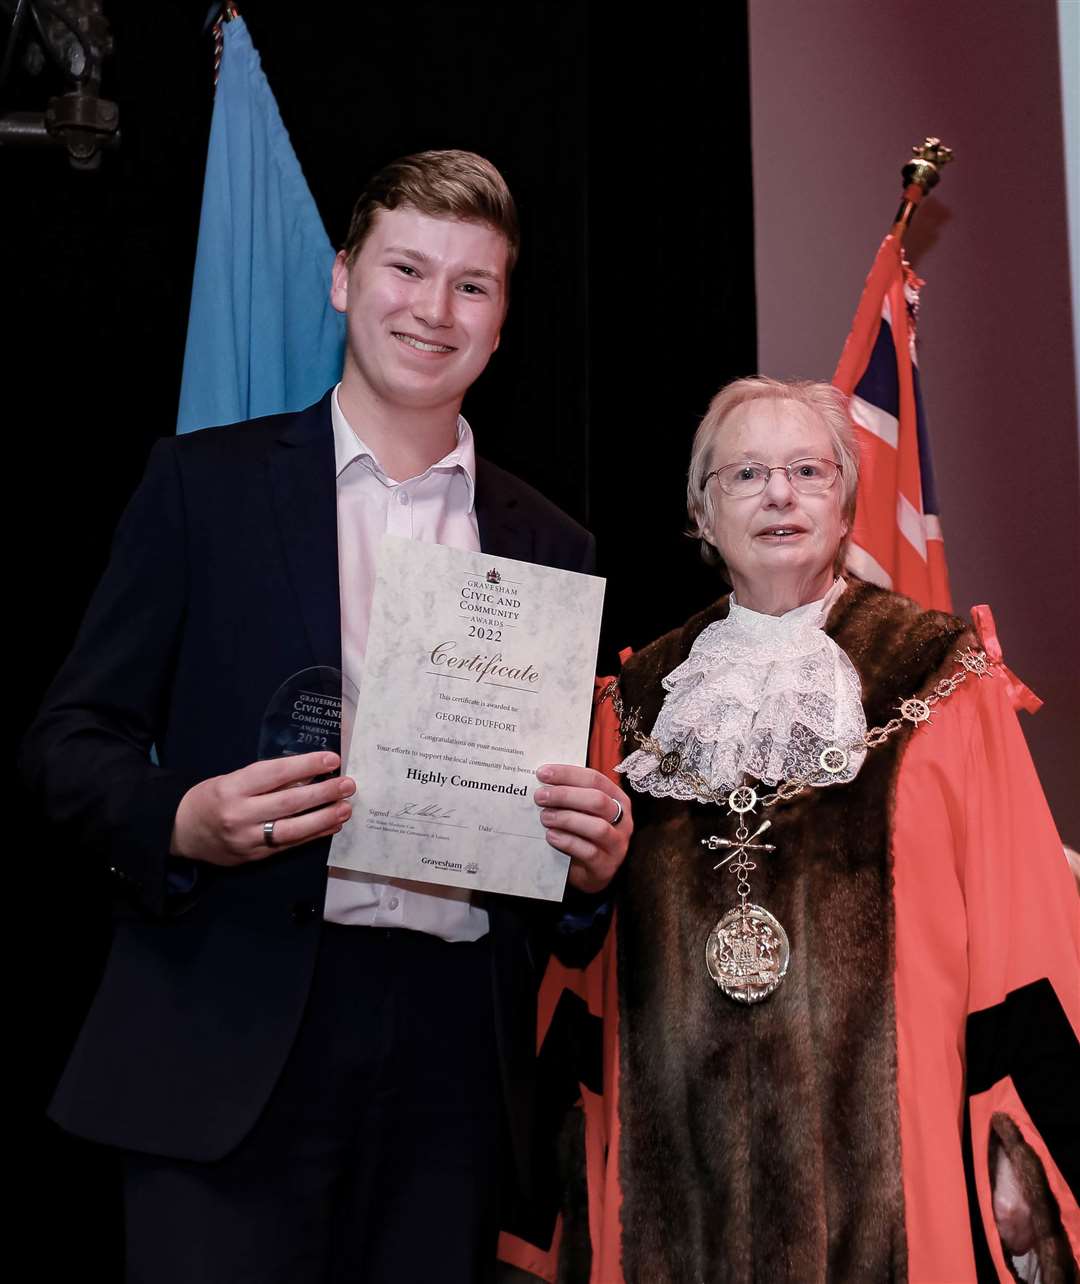 George Duffort with the outgoing Mayor of Gravesham, Cllr Lyn Milner. Photo: Gravesham council